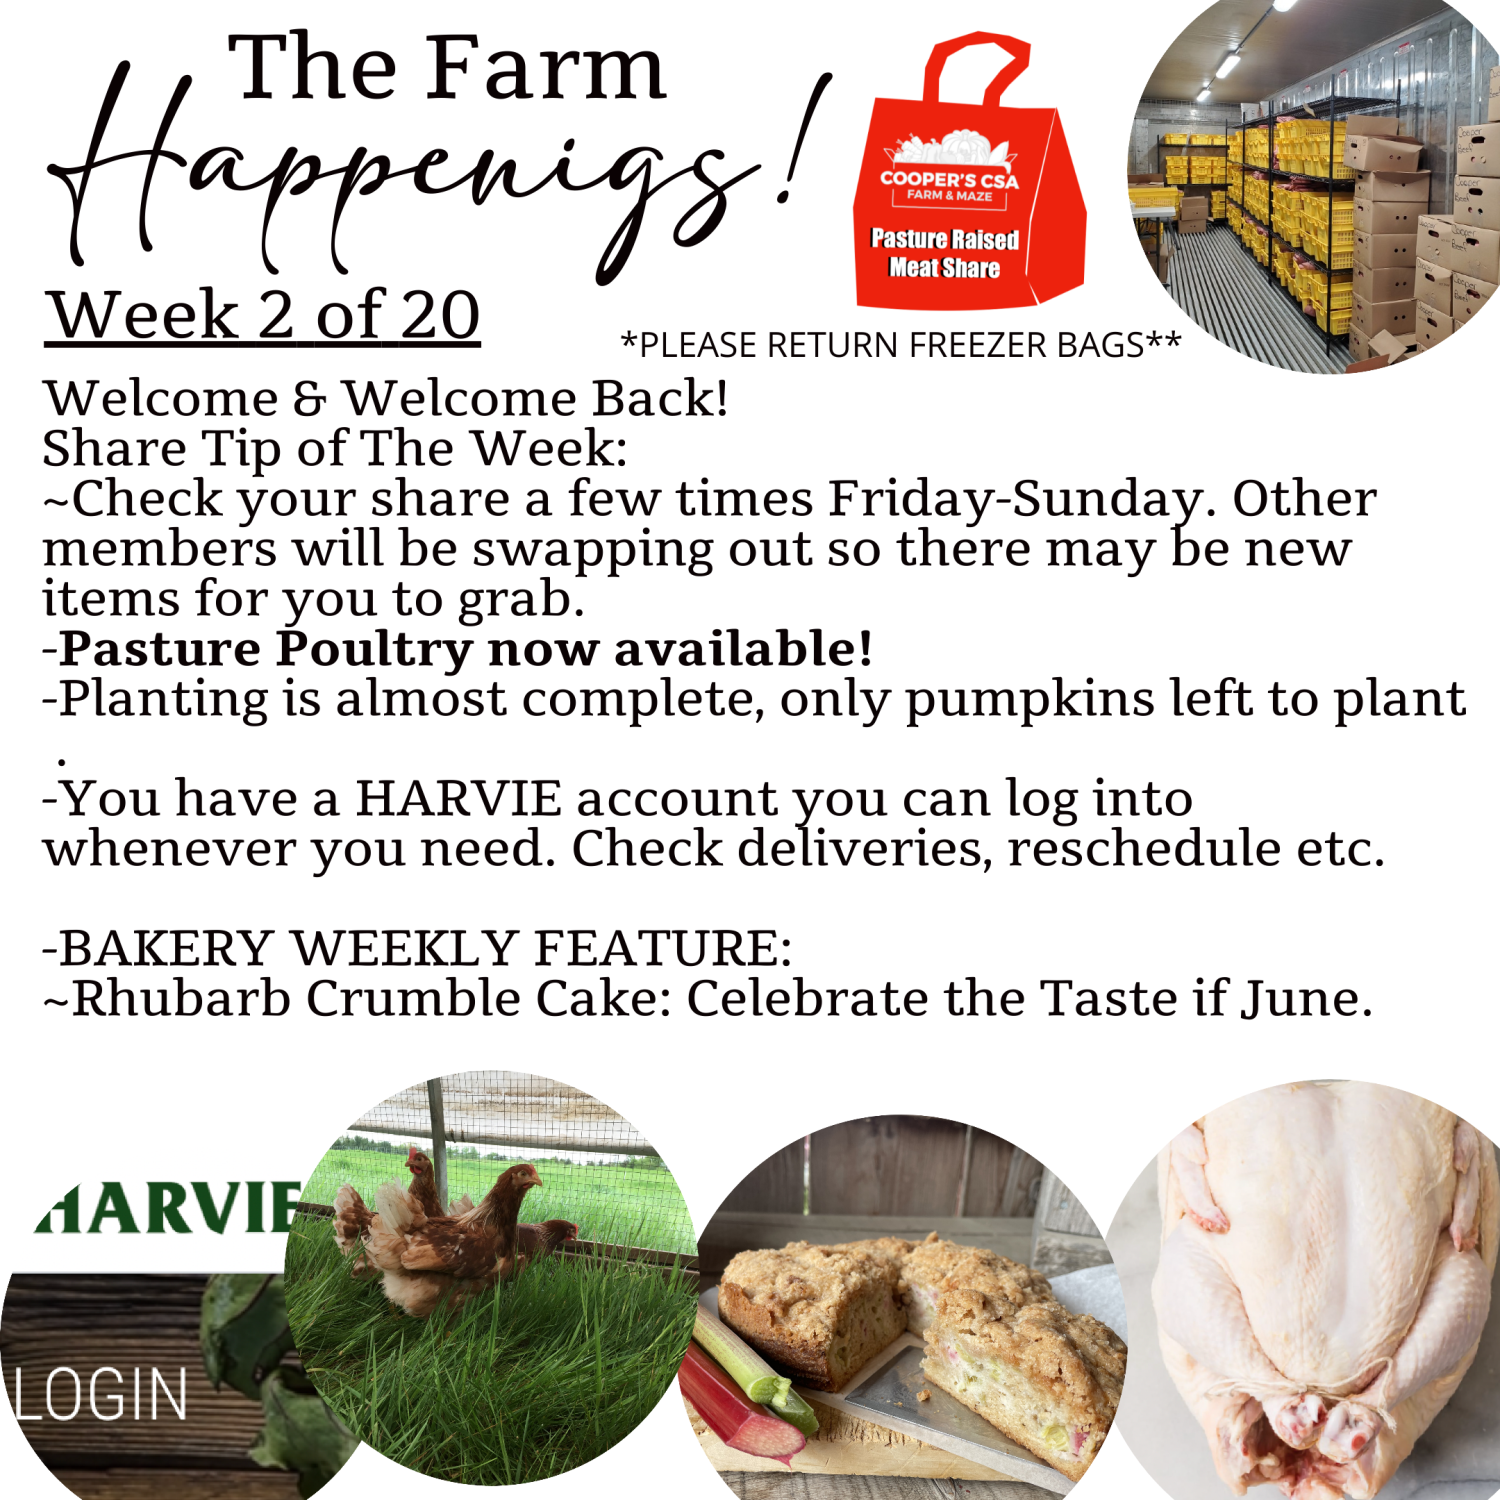 "Pasture Meat Shares"-Coopers CSA Farm Farm Happenings Week 2